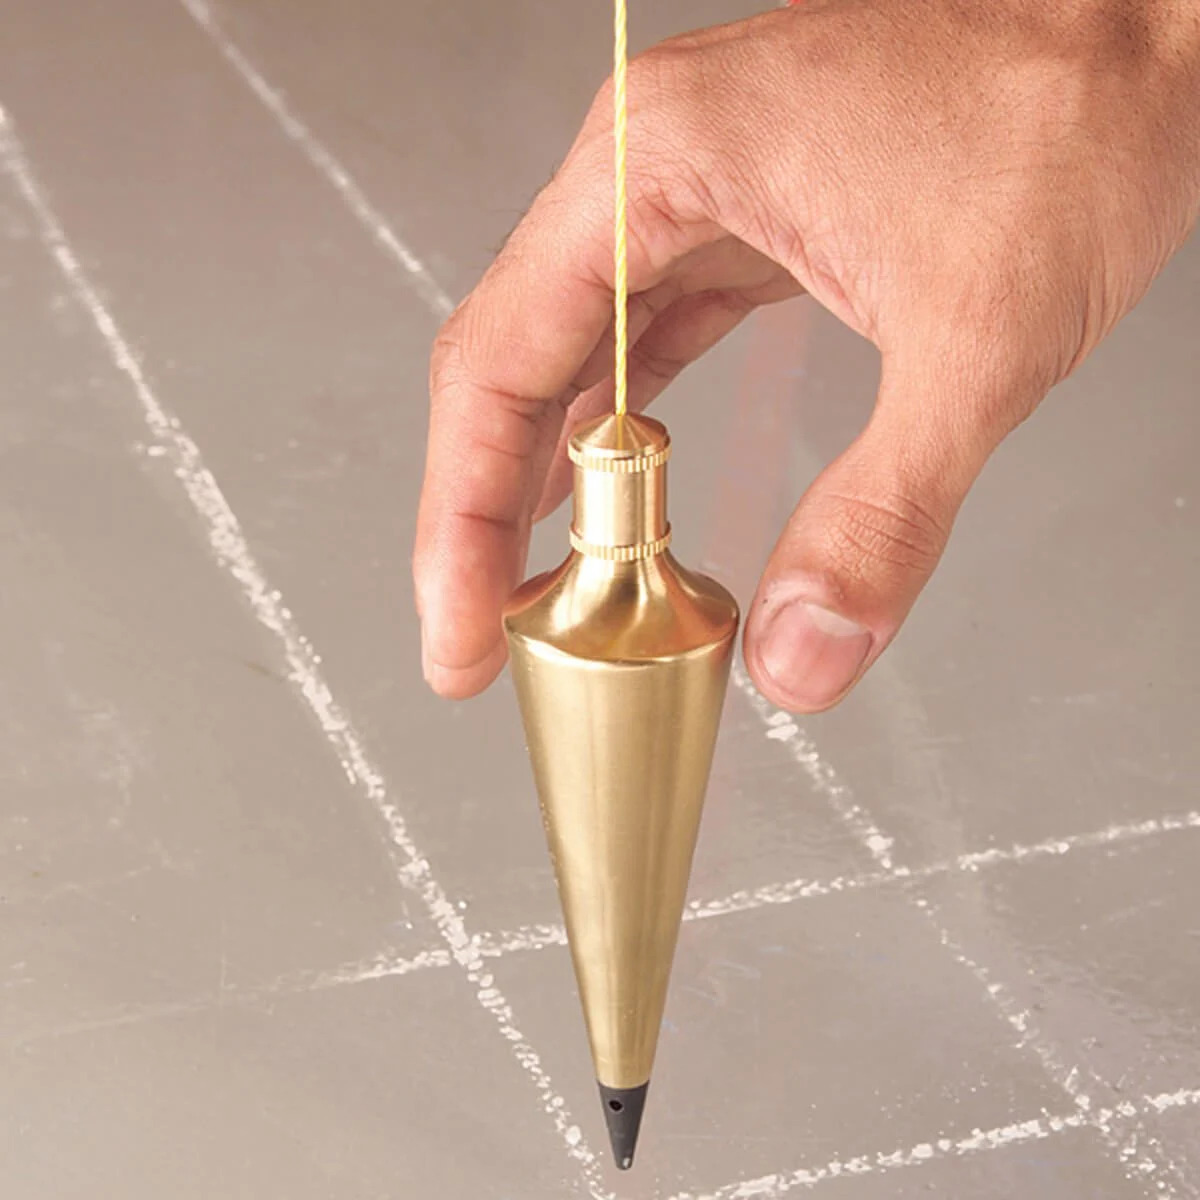 How To Find Roof Pitch With A Speed Square In A Plumb Bob